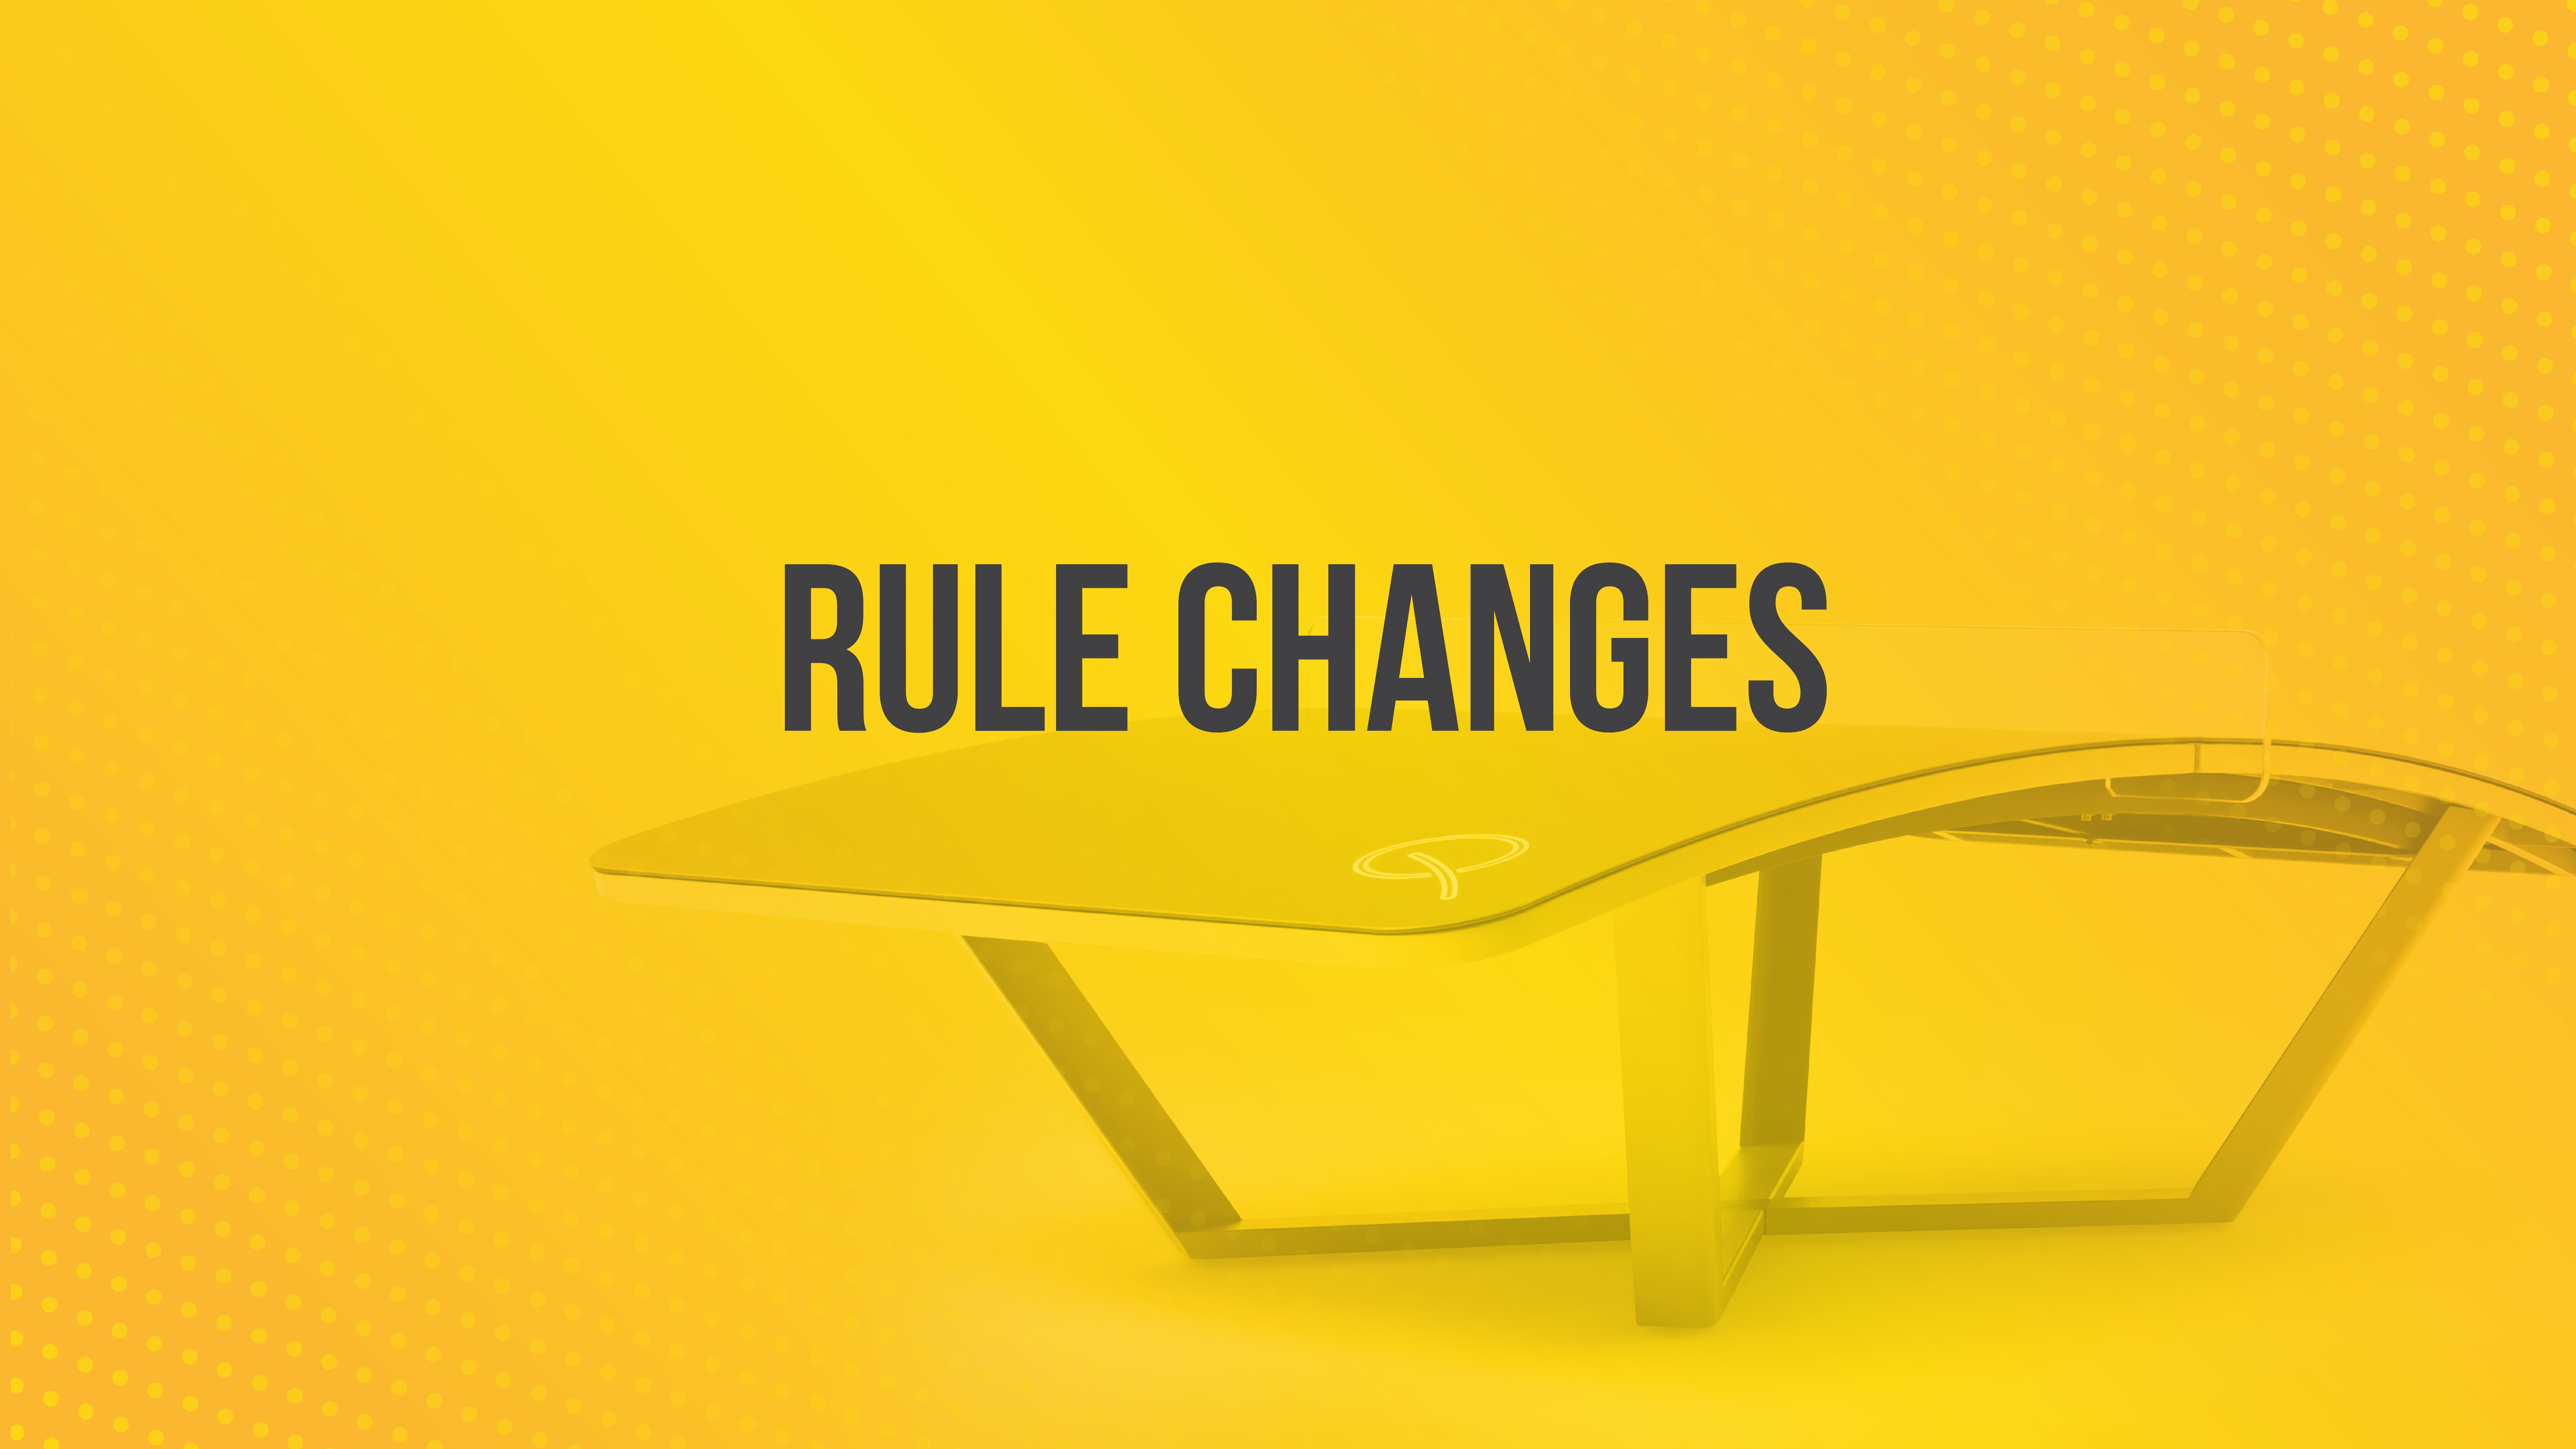 Changes in the Rules of the Game